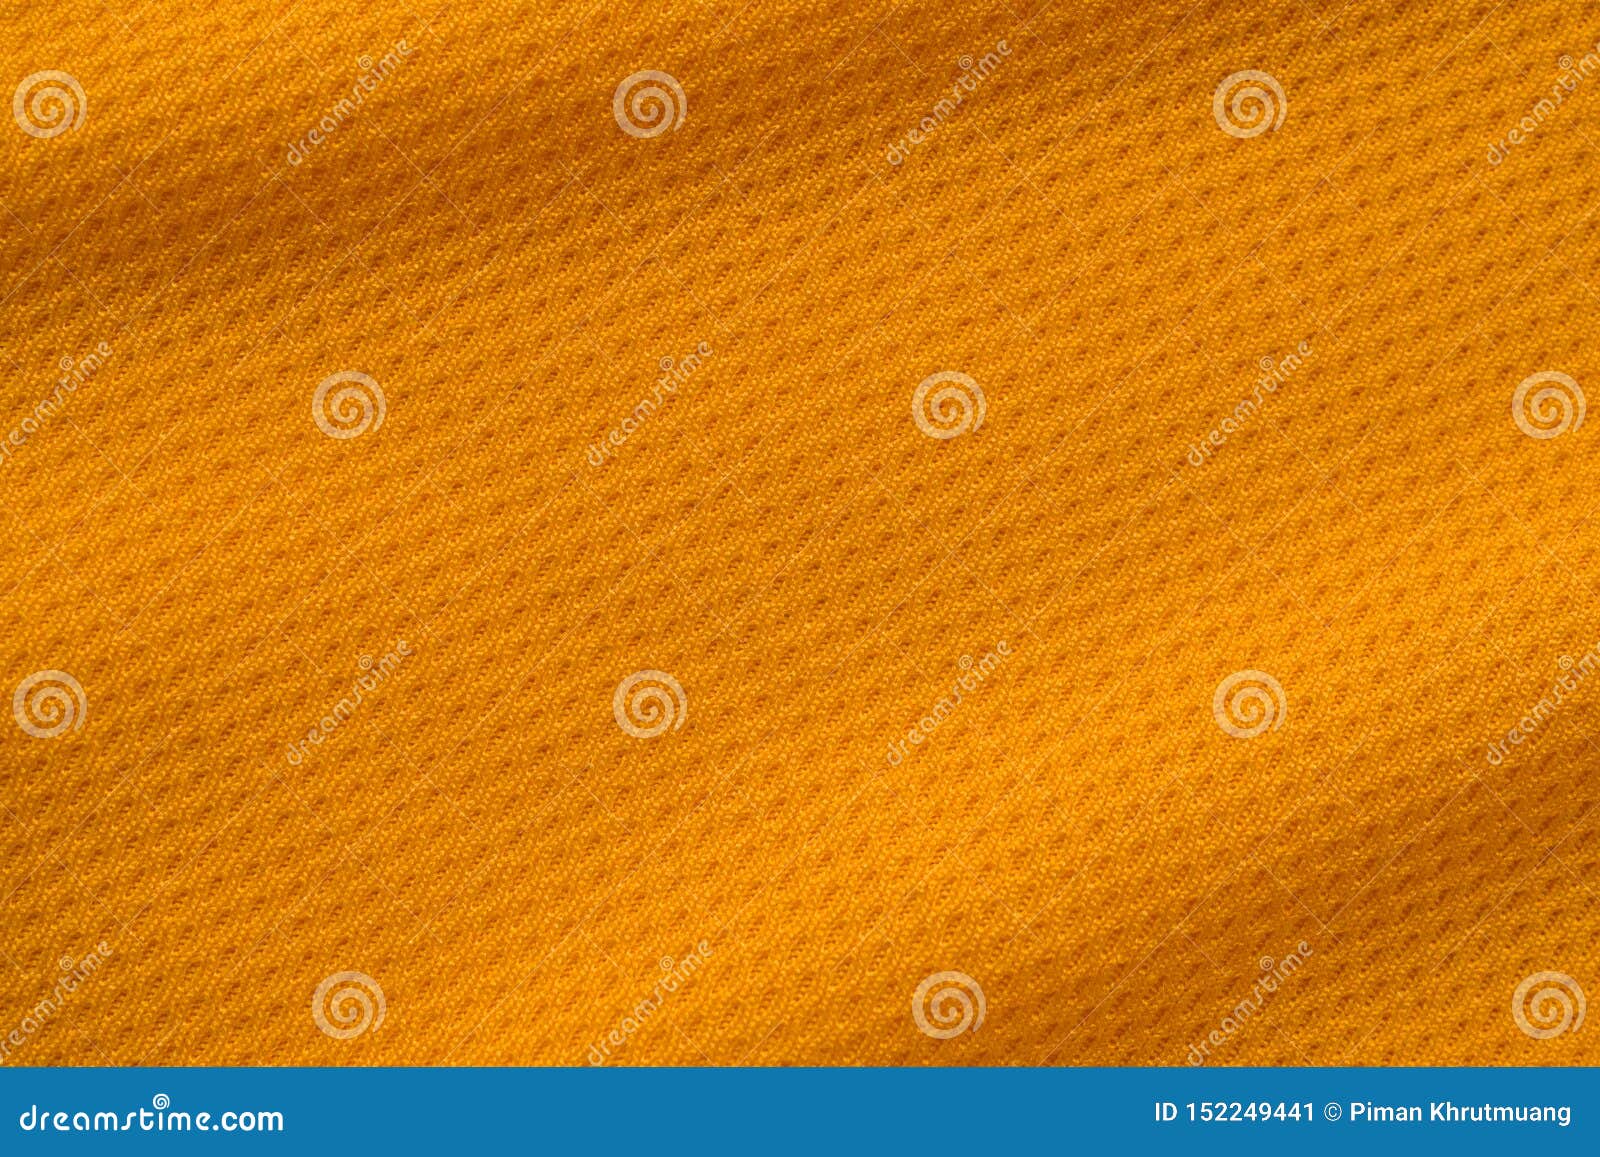 Orange Color Sports Clothing Fabric Jersey Football Shirt Texture Stock ...